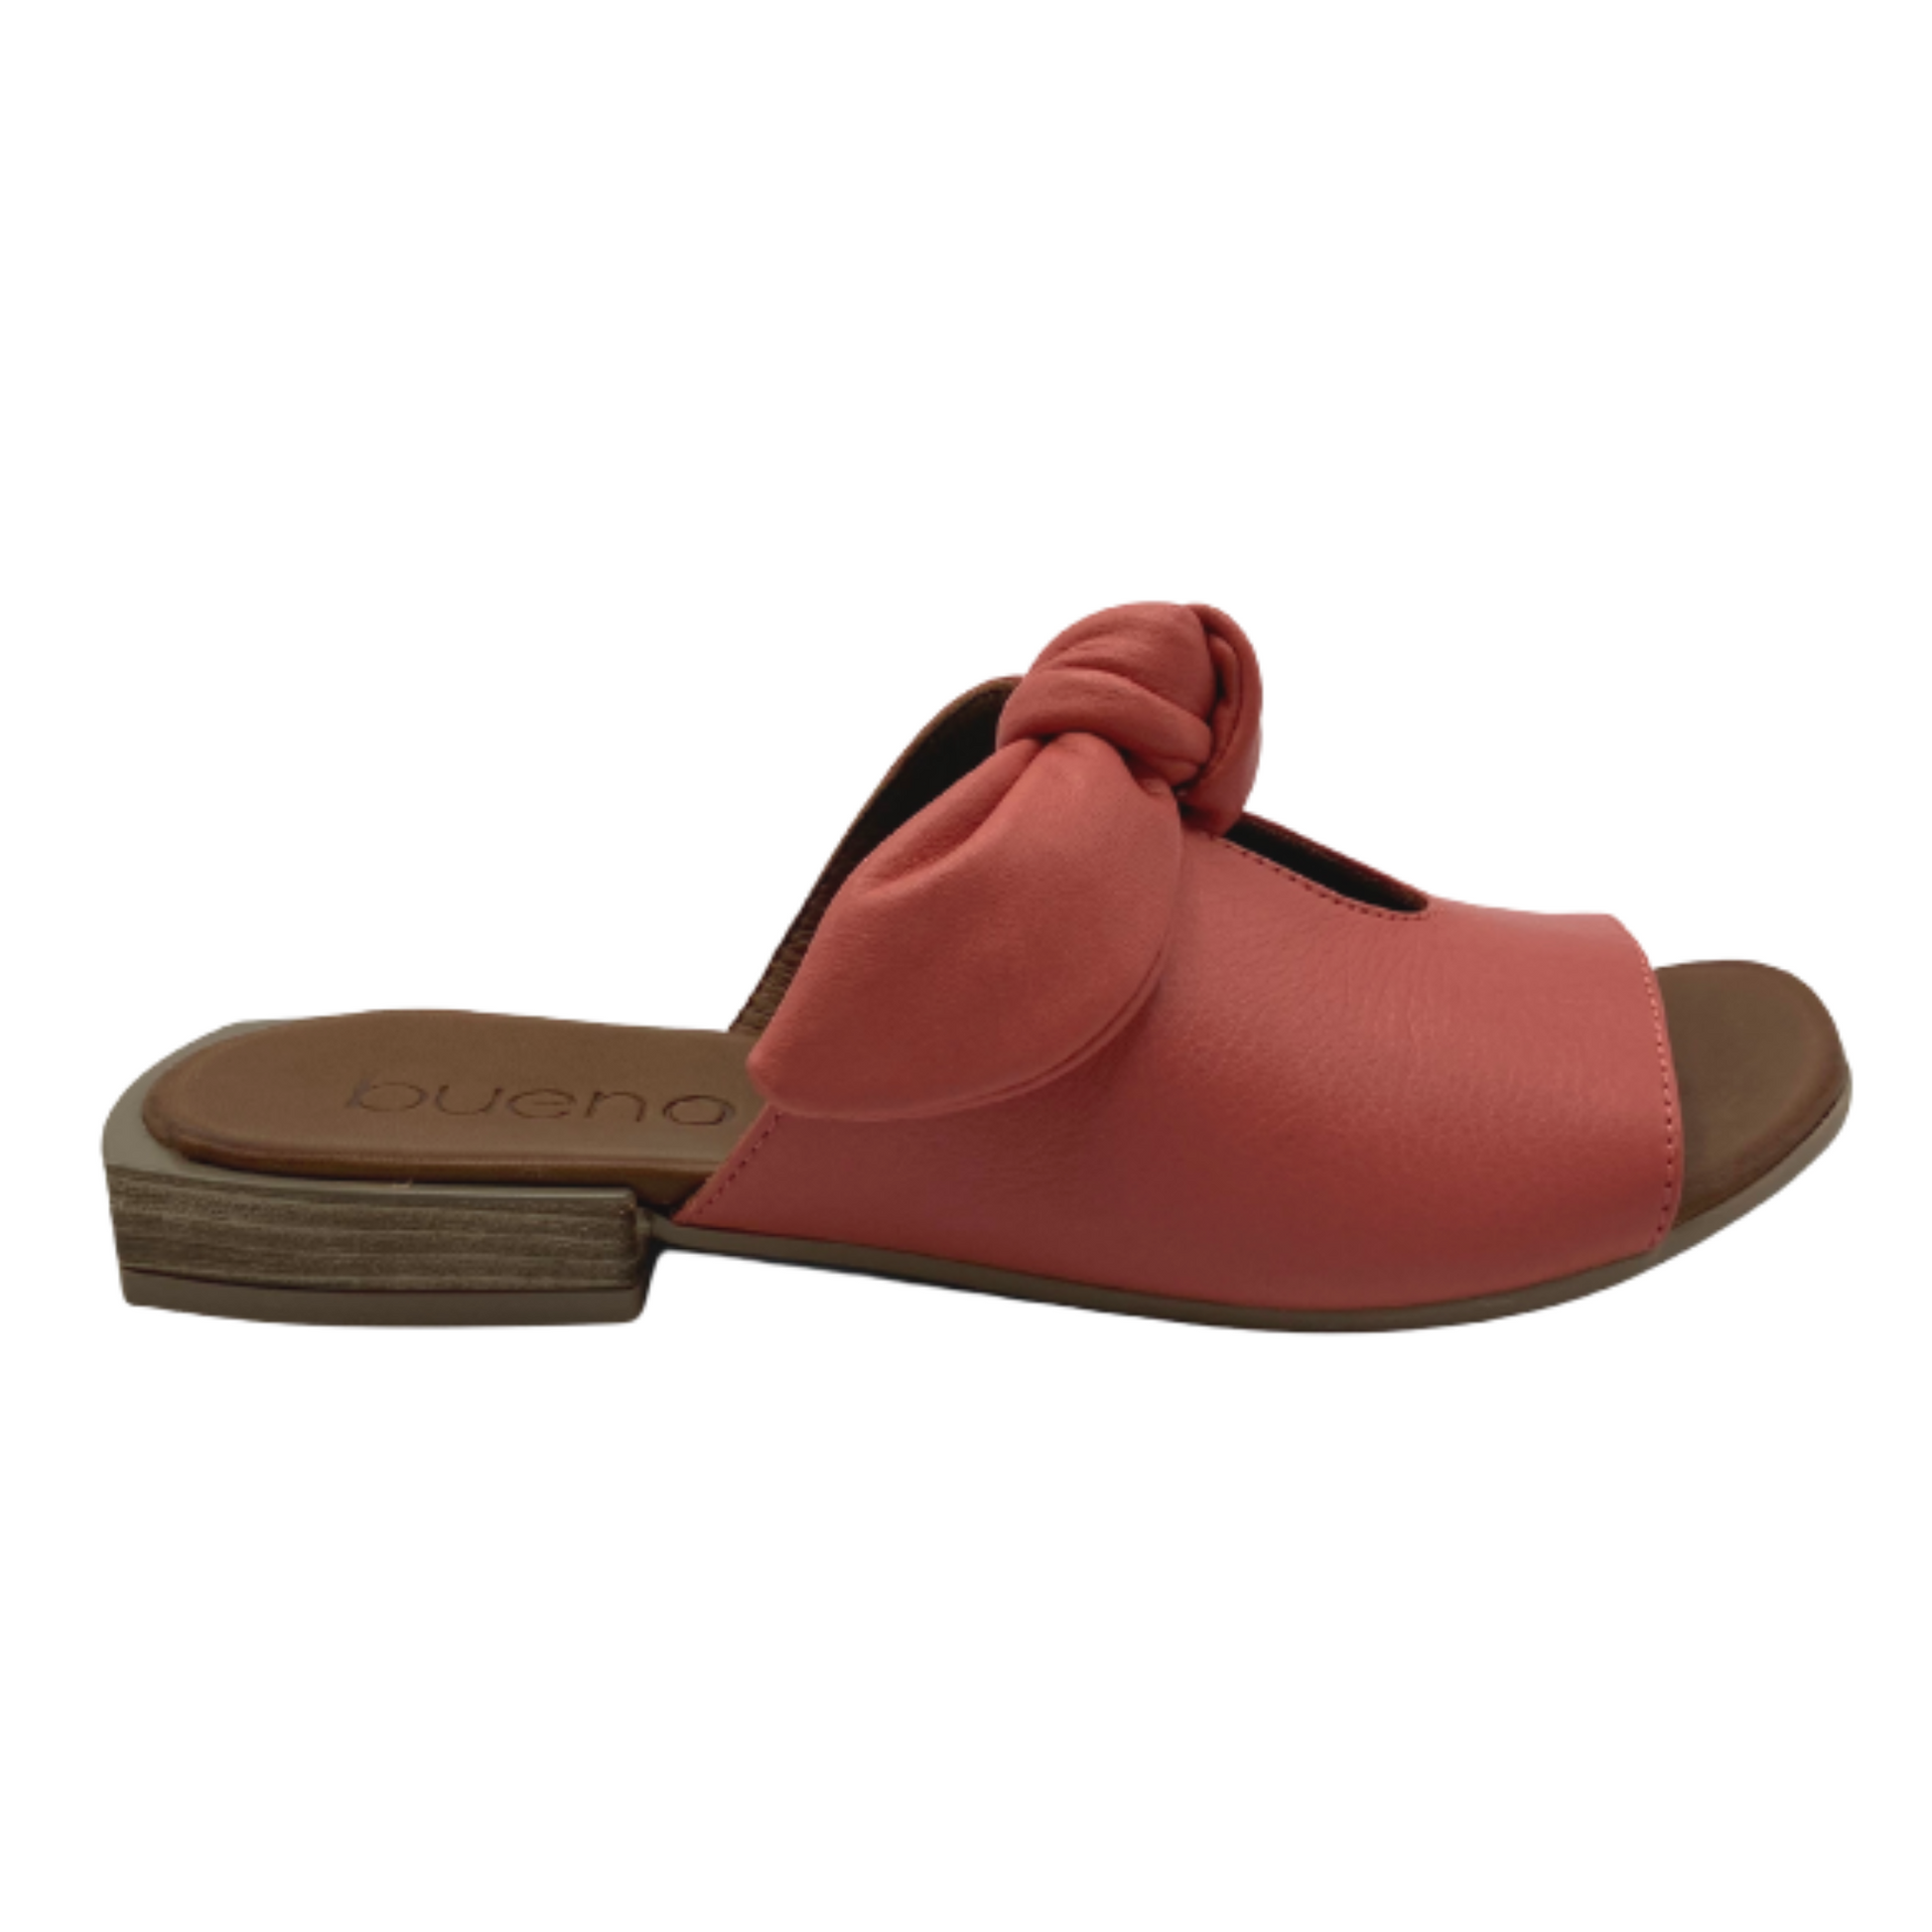 The side of the coral-red-pink sandal is pictured in profile showing a slight heel with block texture.